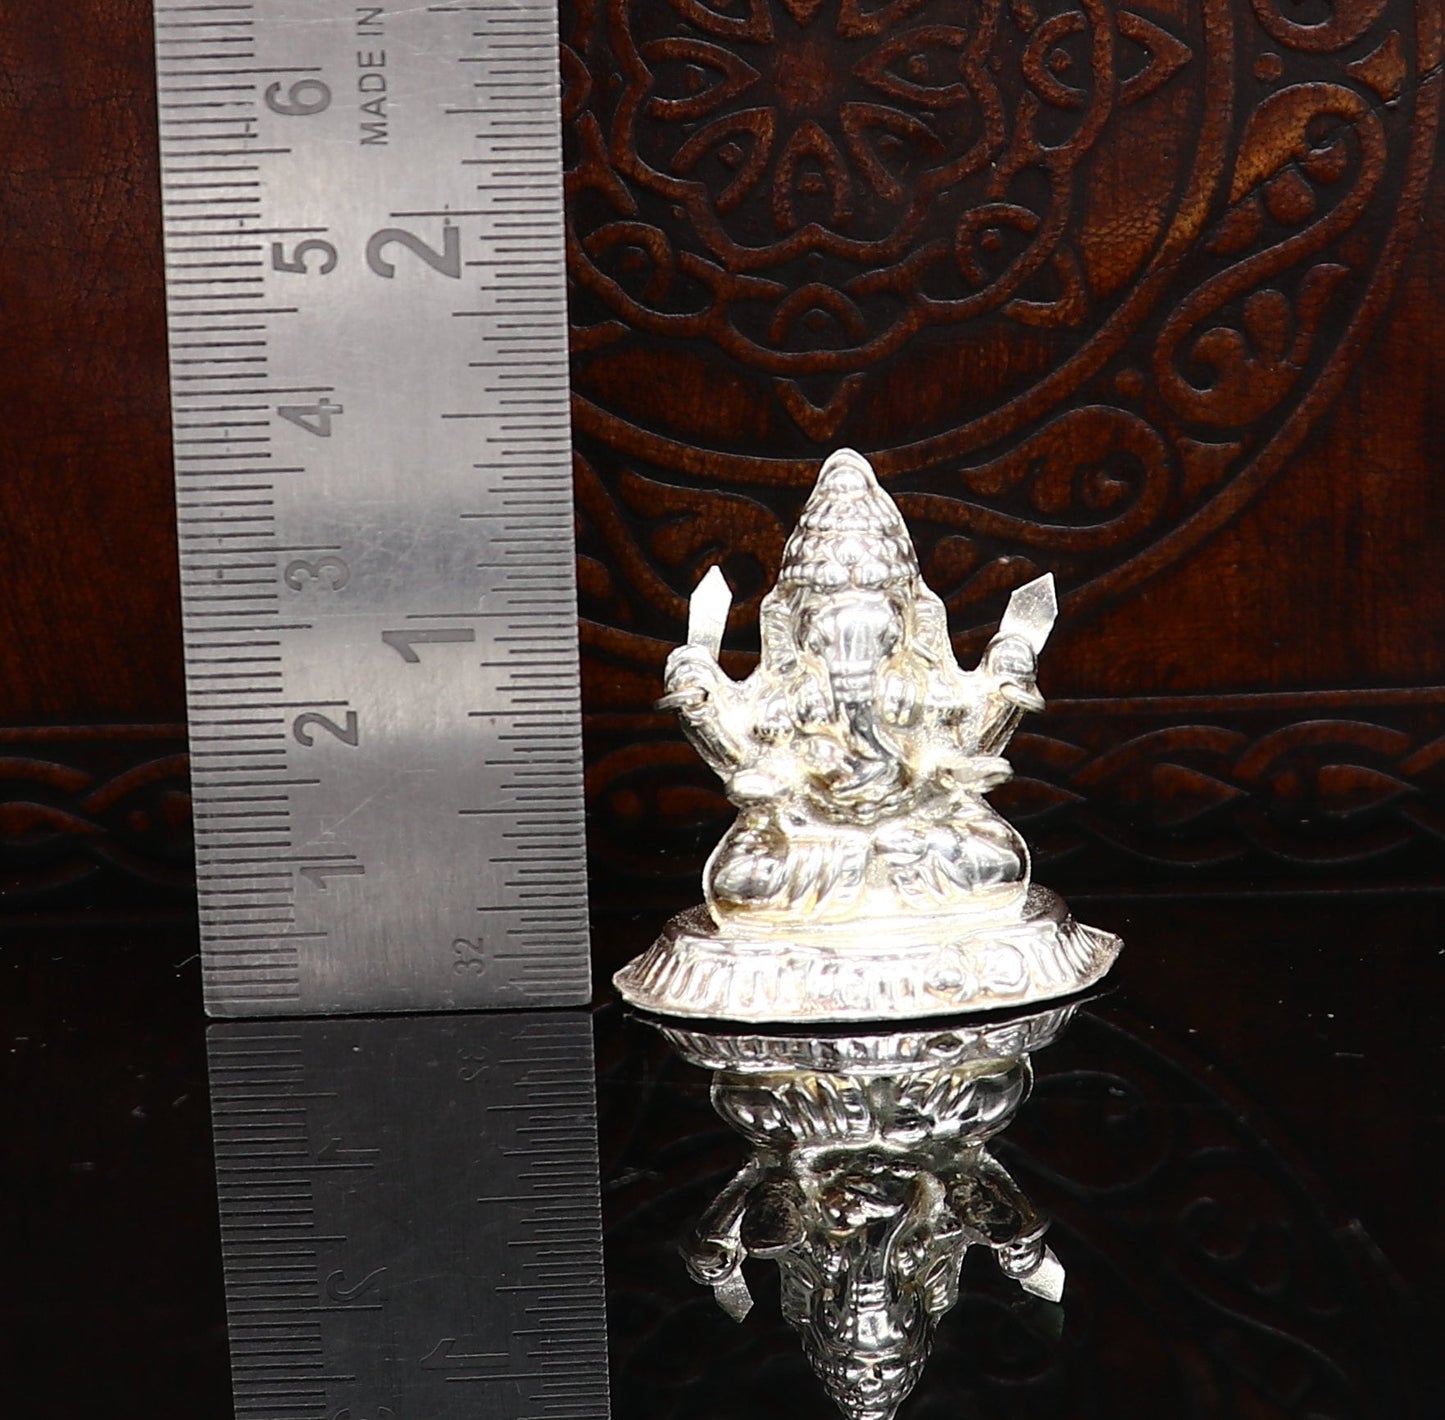 Lord Ganesha With Stand or Bazot, fabulous Sterling silver ganesha statue figurine for home temple diwali puja article utensils su375 - TRIBAL ORNAMENTS